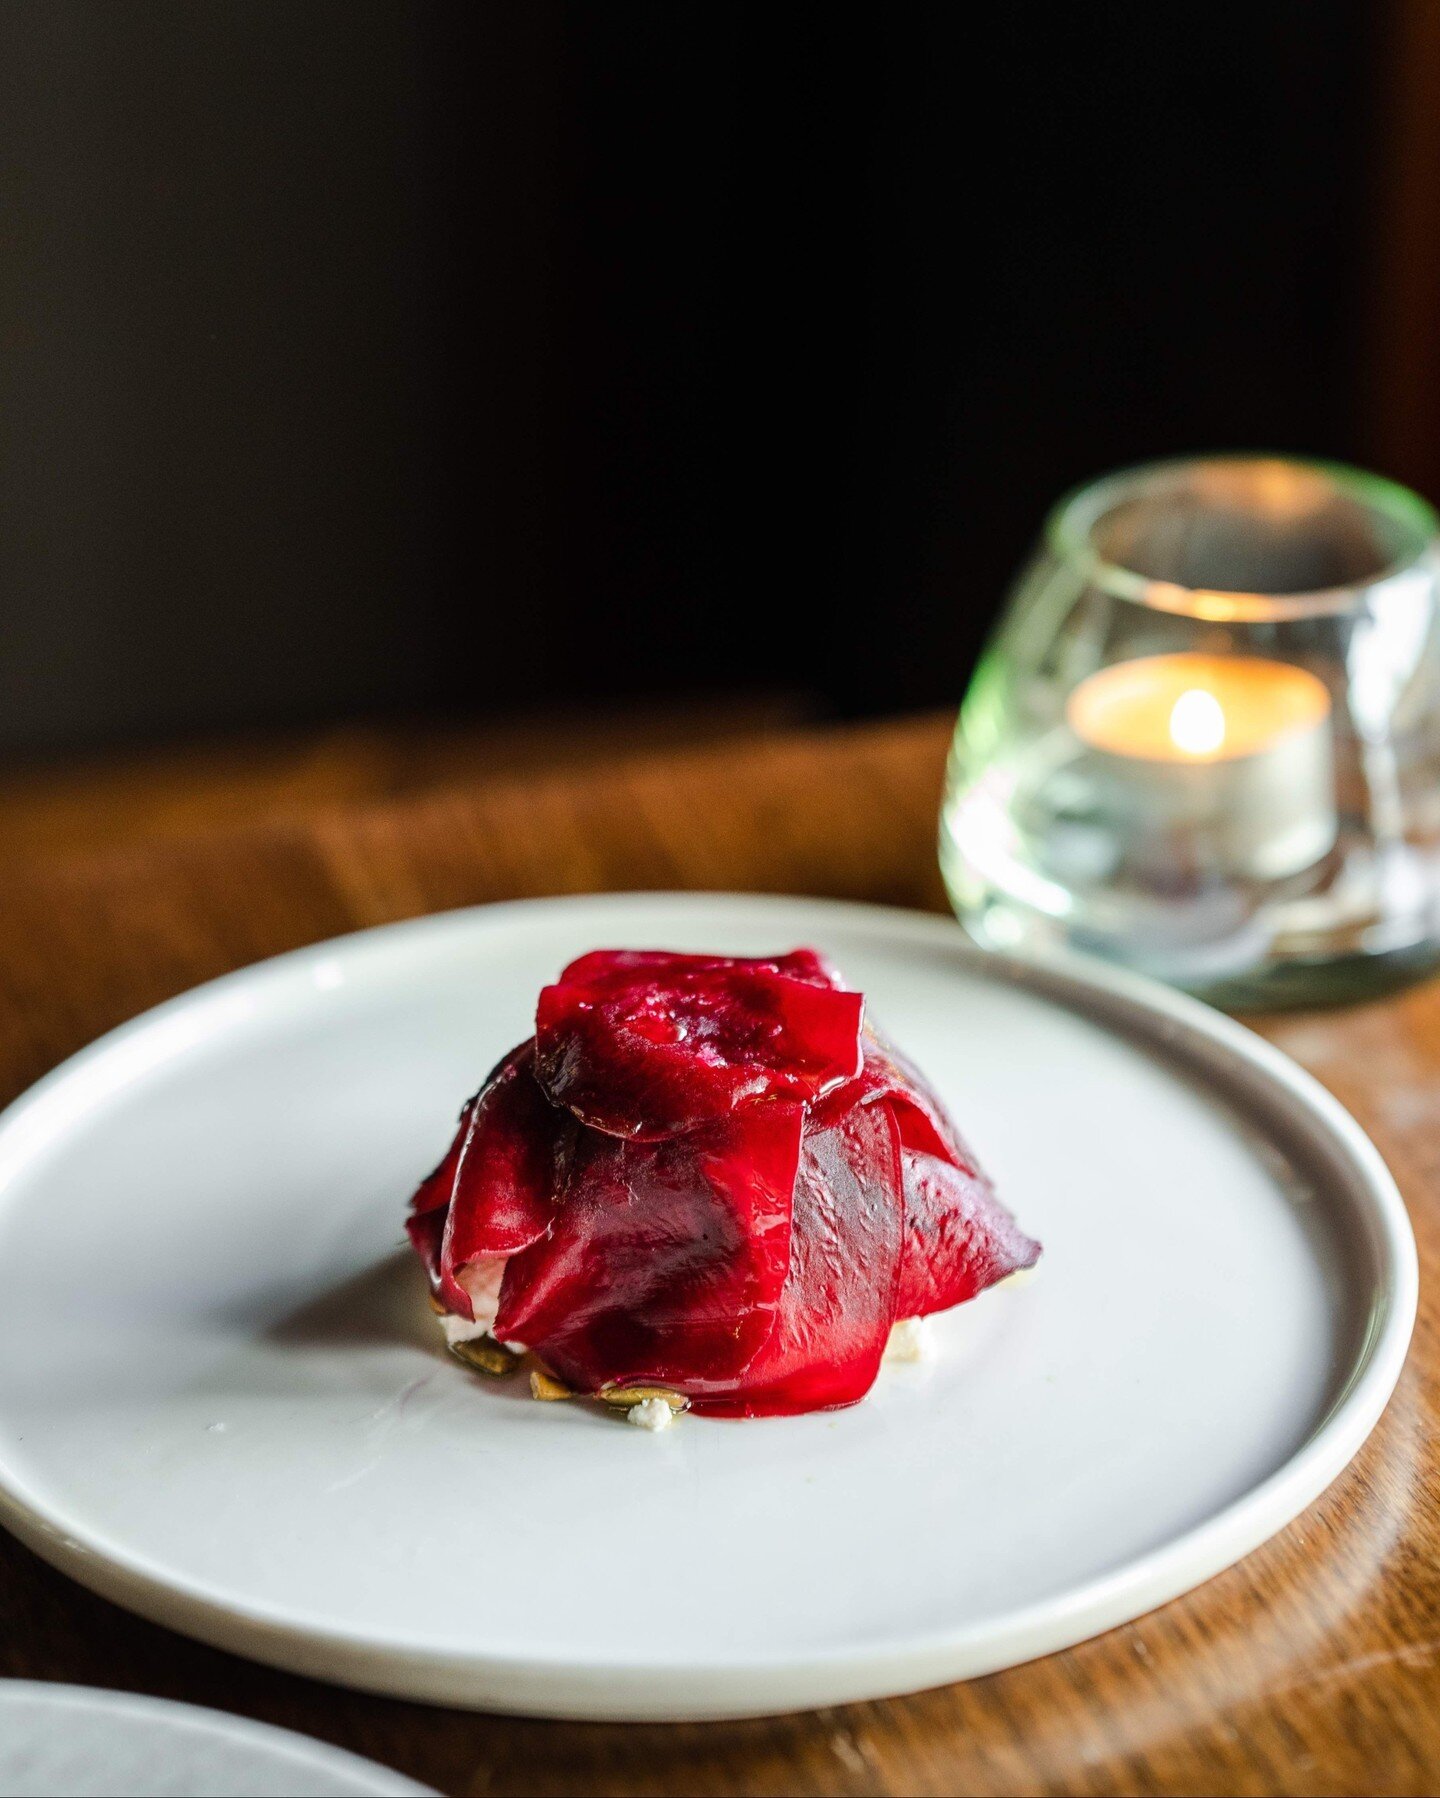 Salt Baked Beetroot, Whey Ricotta, Pumpkin Seed, Pickled Onion.

This tart and creamy bite of indulgence is available all Winter at Annata.
Visit the link in our bio to reserve your table.

#restaurant #sydneyrestaurant #sydneyeats #sydneyfood #sydne